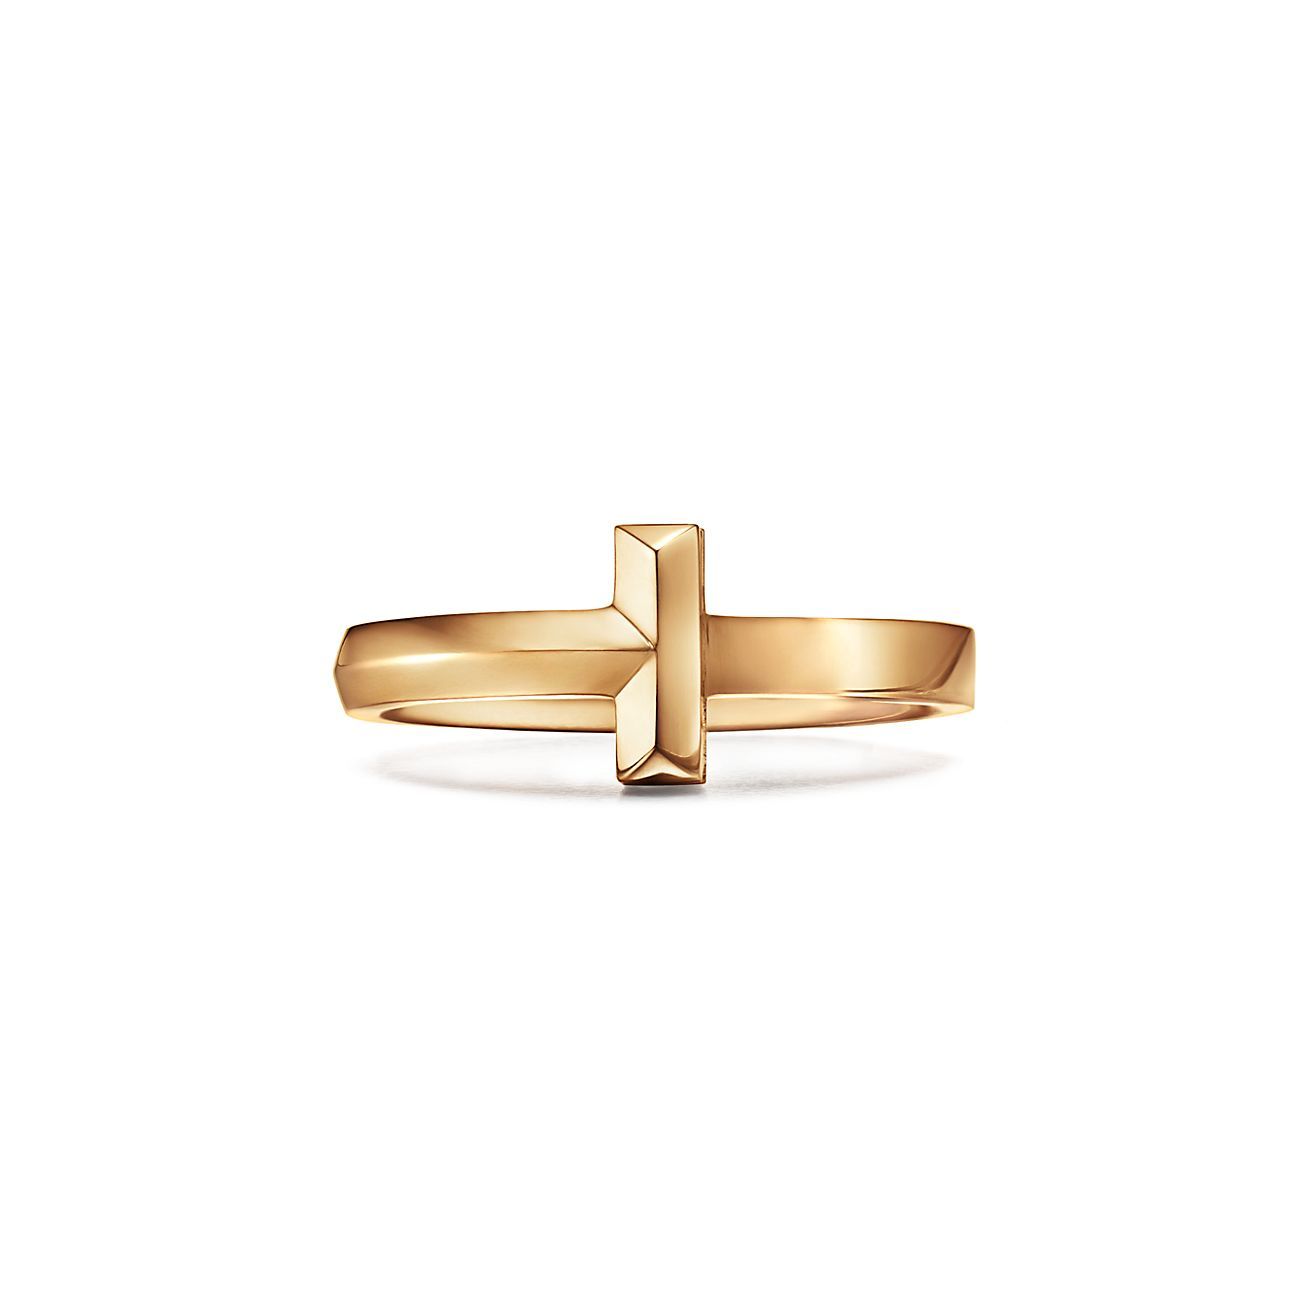 Tiffany T T1 Ring in Yellow Gold, 2.5 mm Wide | Tiffany & Co. | Tiffany & Co. (UK)